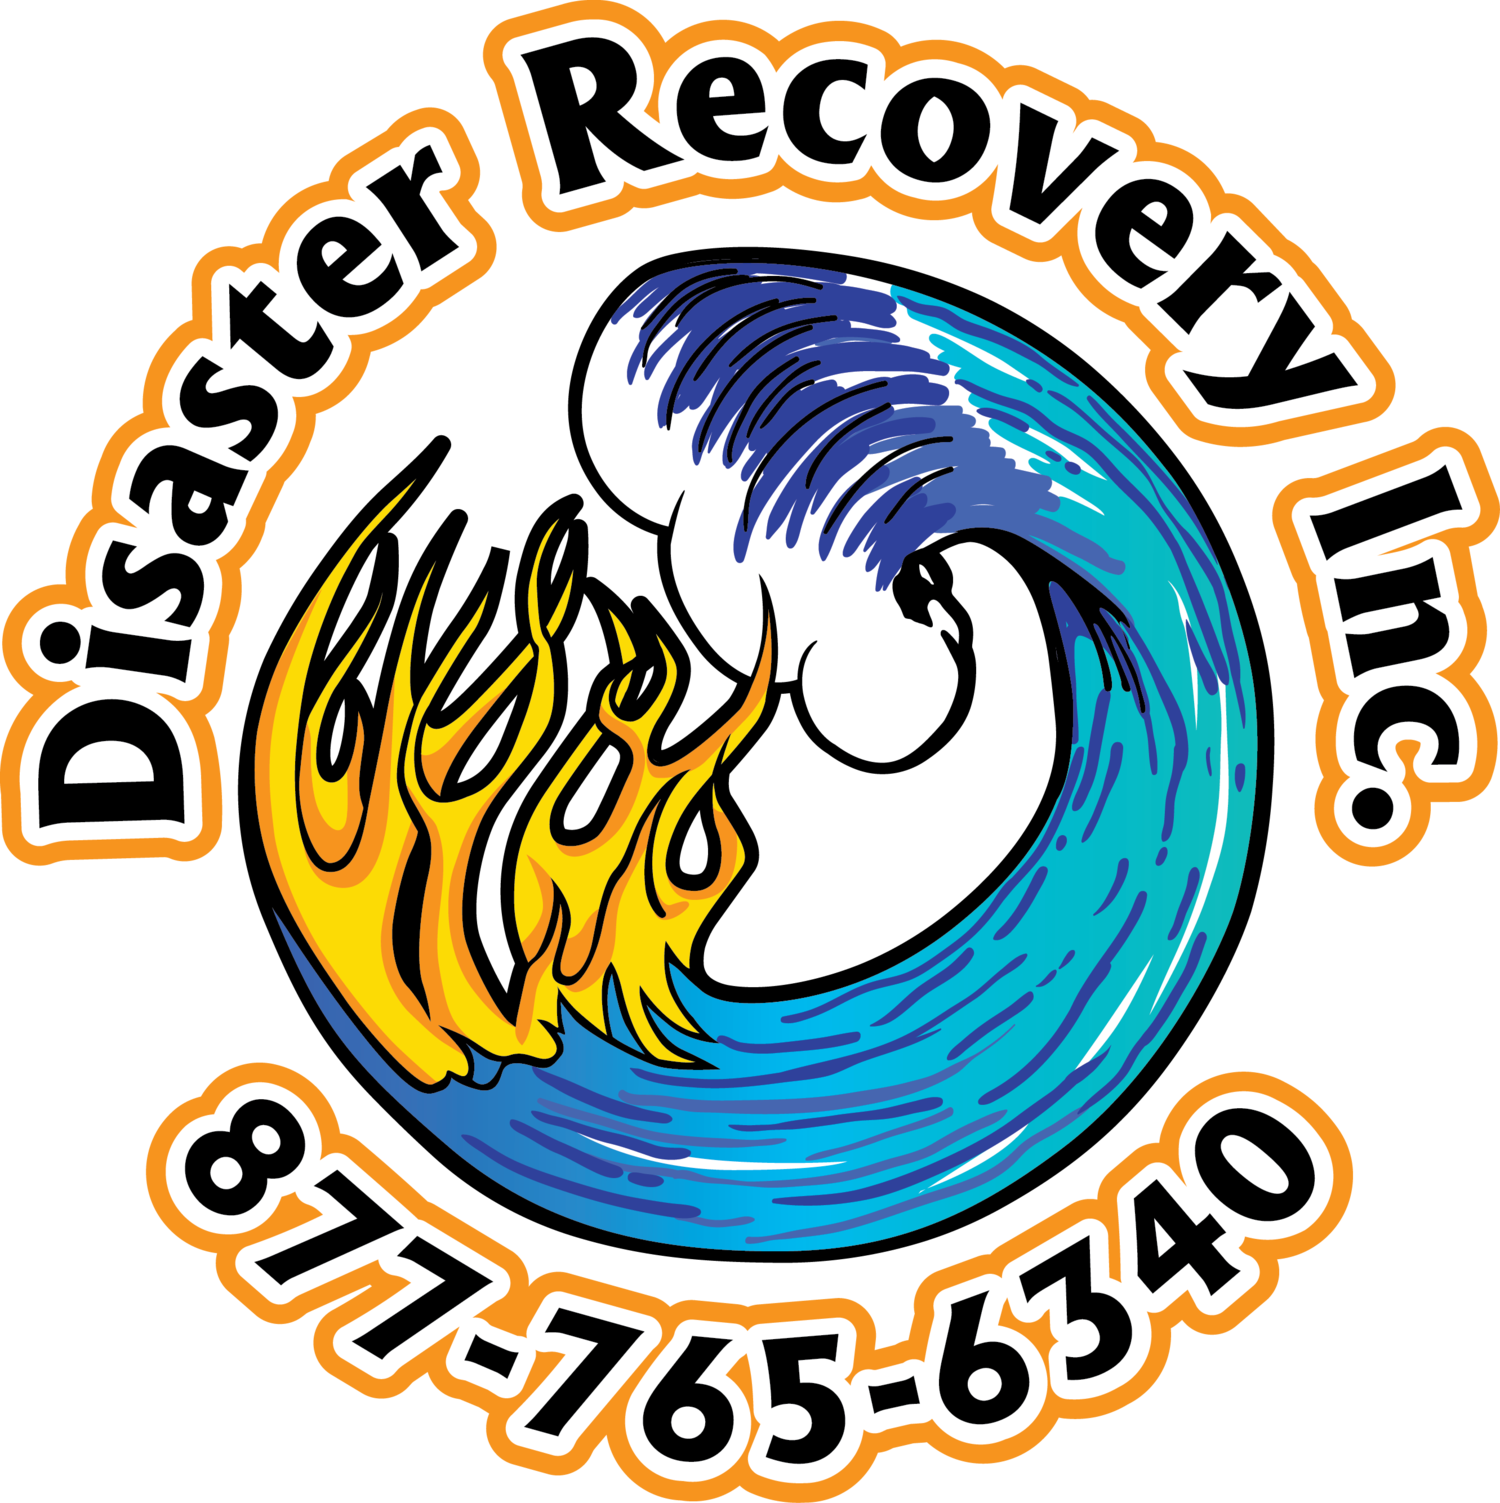 Craig Pelkey Disaster Recovery